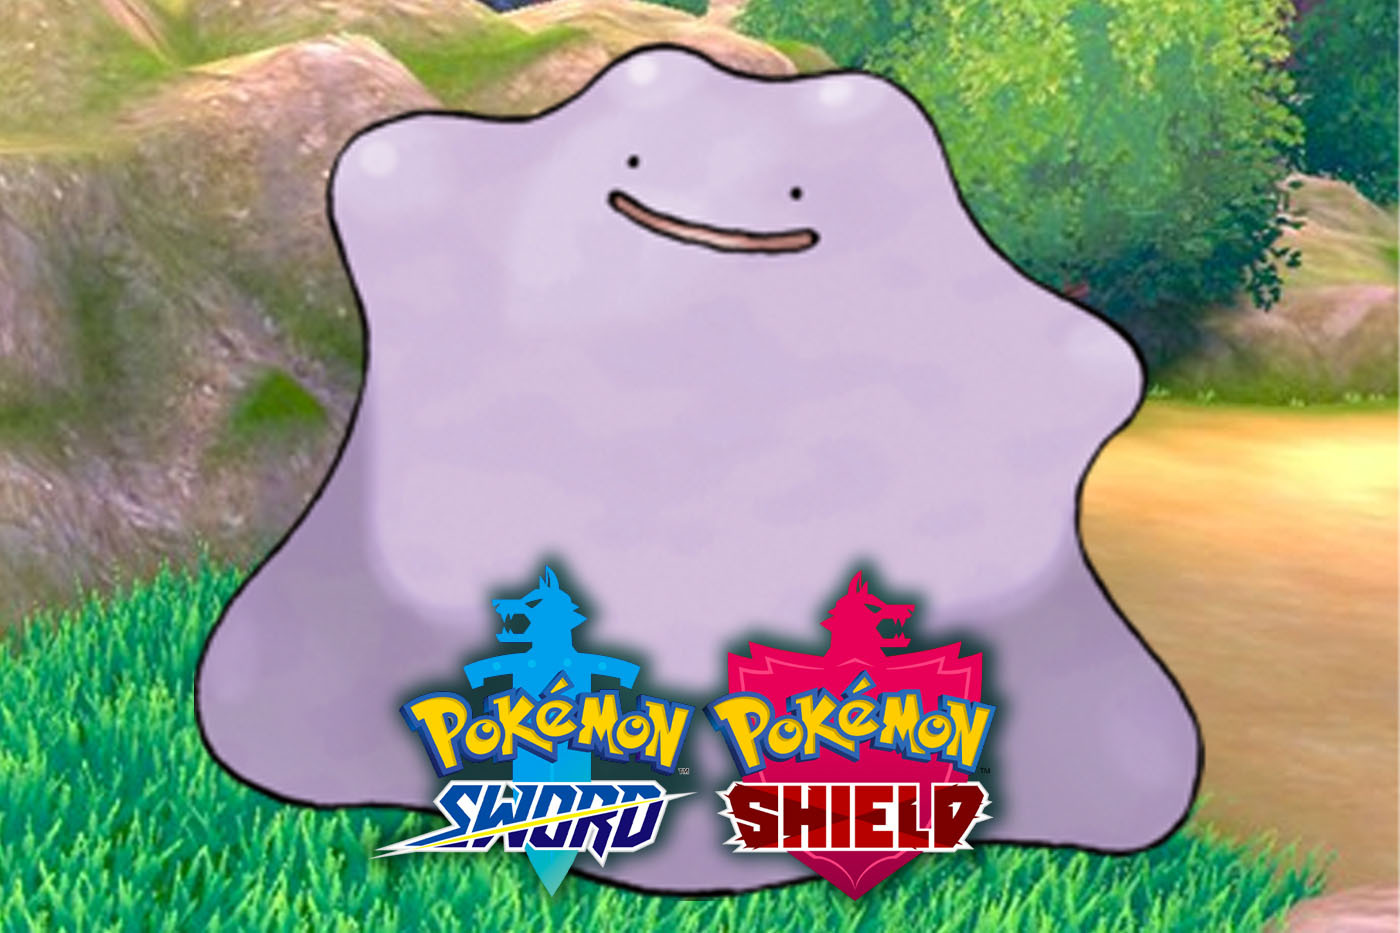 Pokémon Sword and Shield guide: Where to find Ditto - Polygon